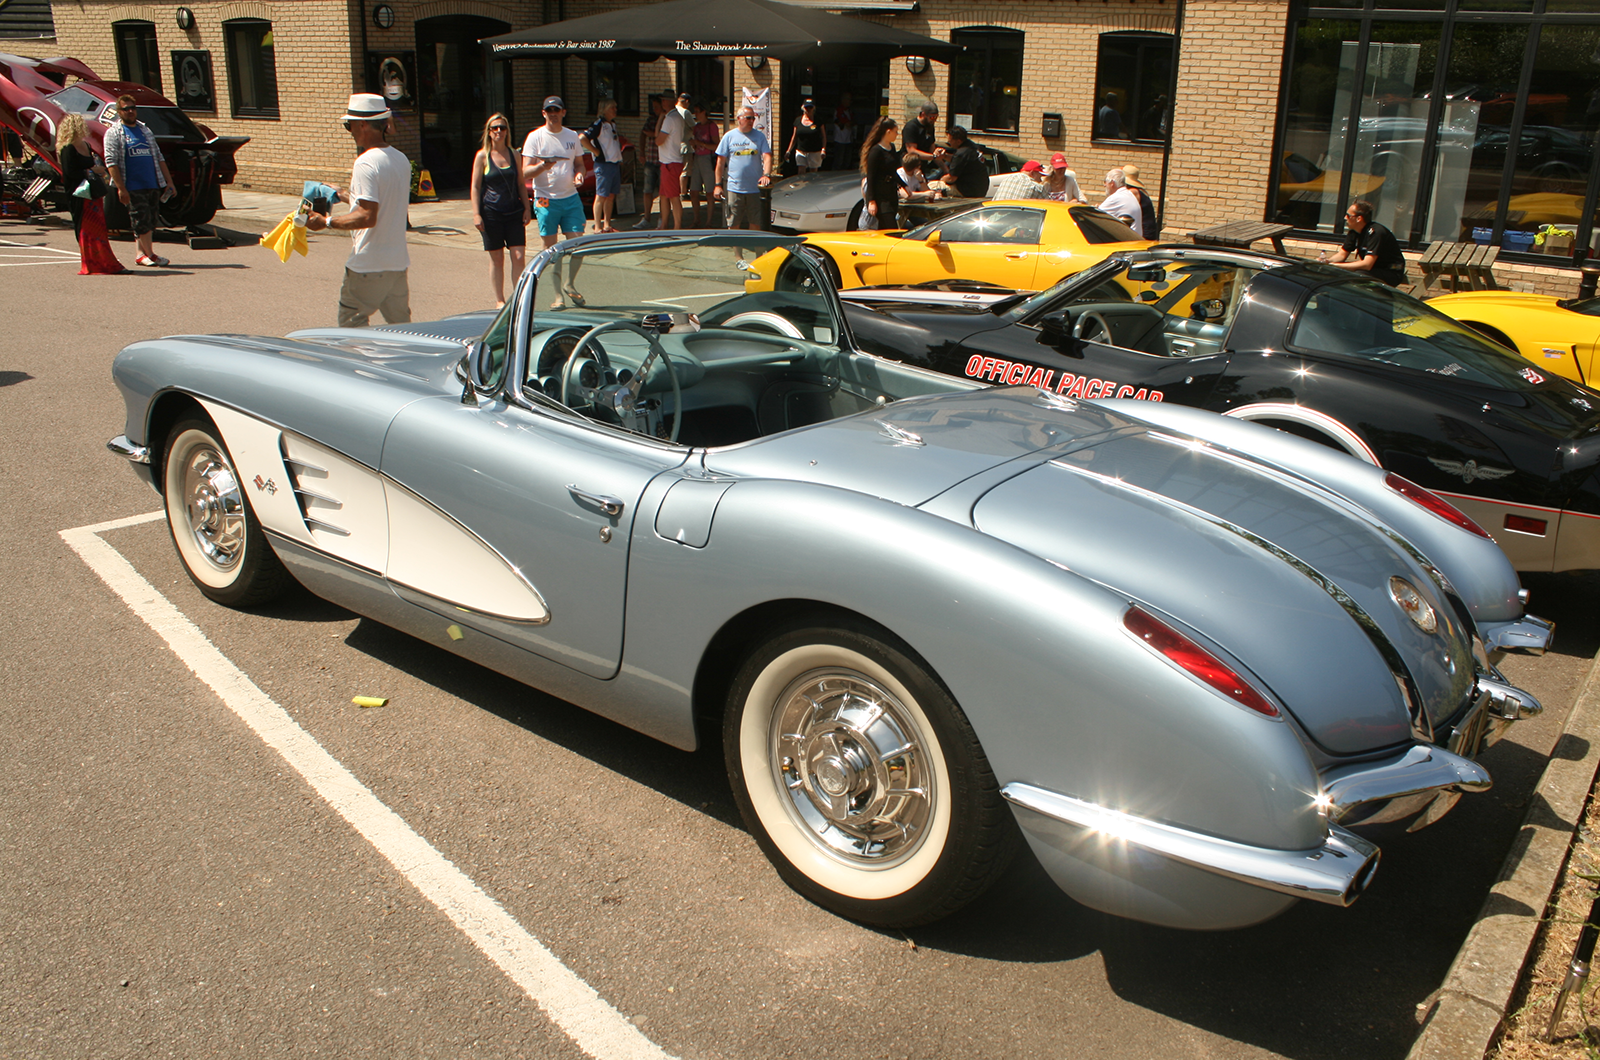 Corvettes out in force for Nationals